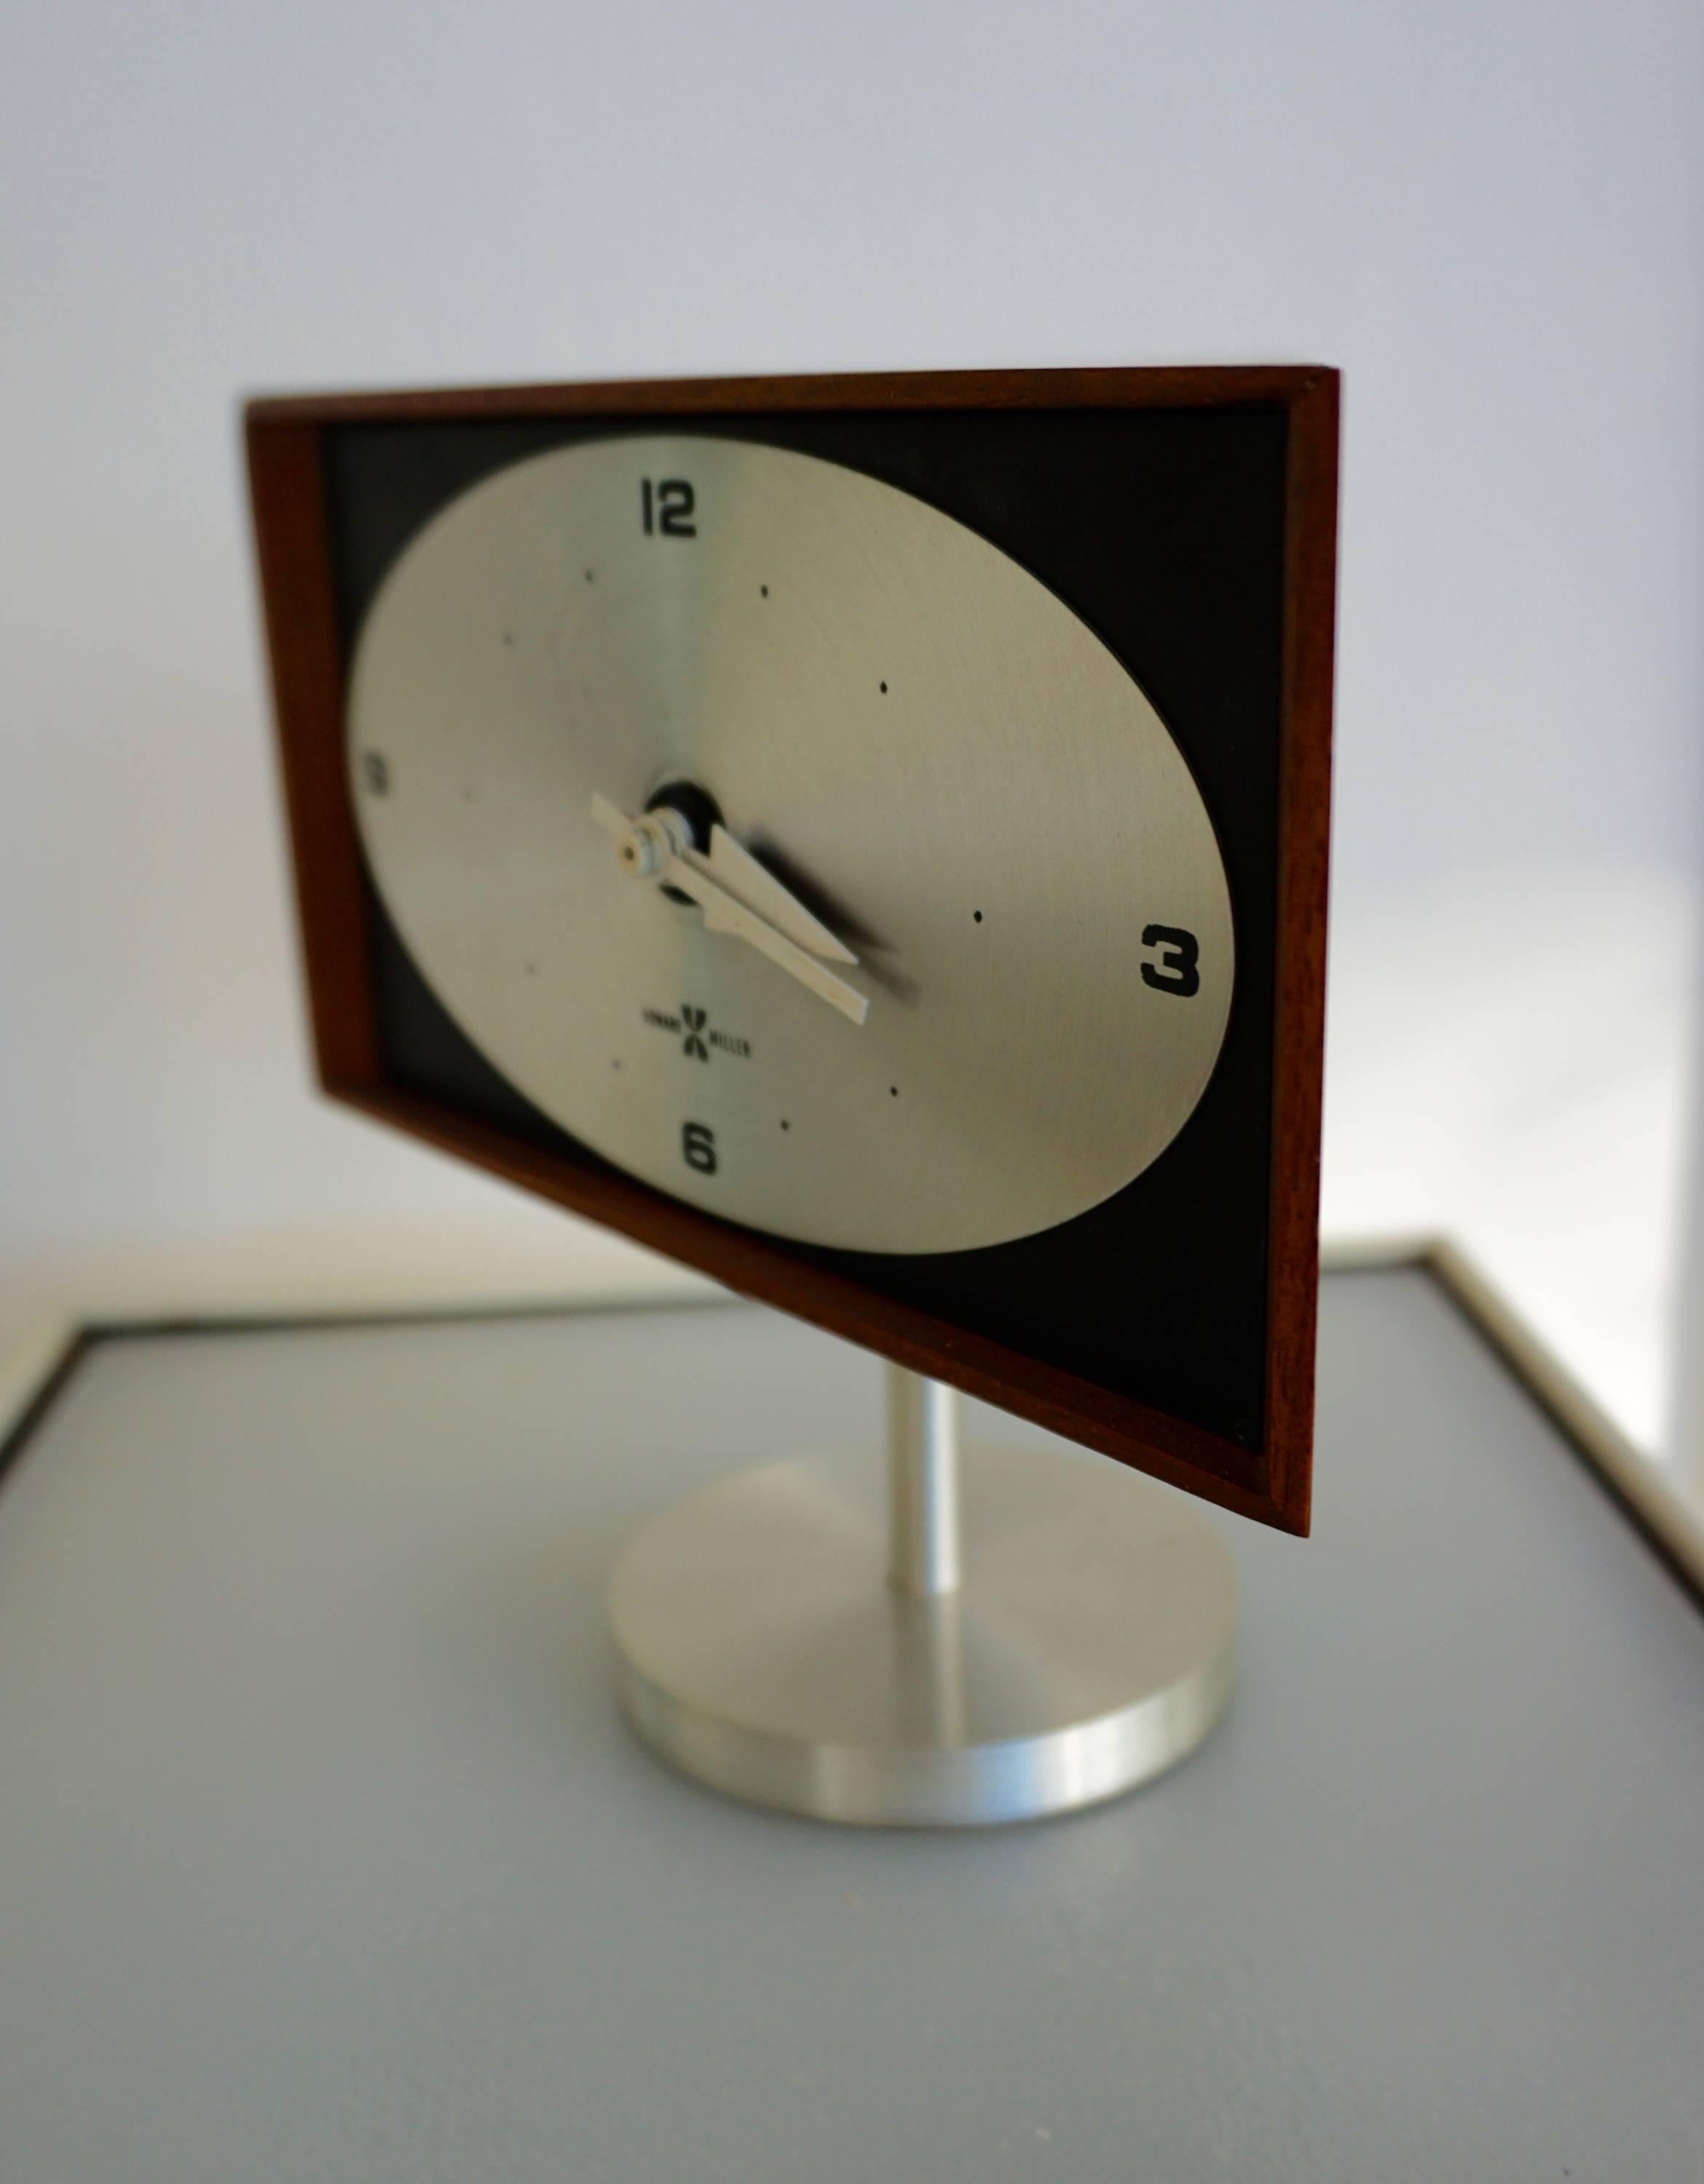 Designed for George Nelson Associates by Irving Harper. Battery operated and running perfectly.
Walnut veneered with spun aluminum face and base.